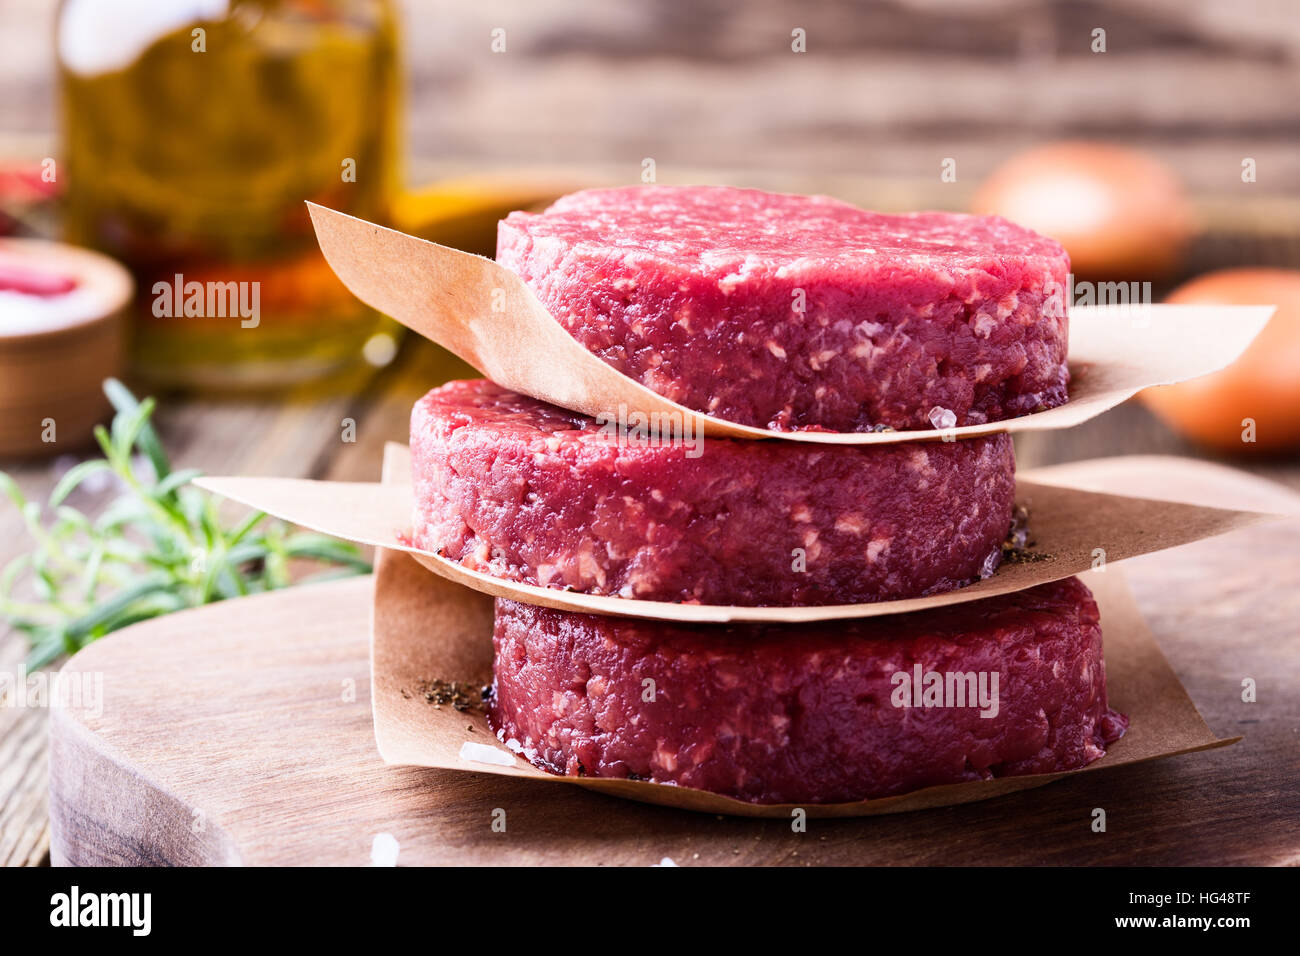 Organic raw ground beef, round patties for making homemade burger on wooden cutting board Stock Photo